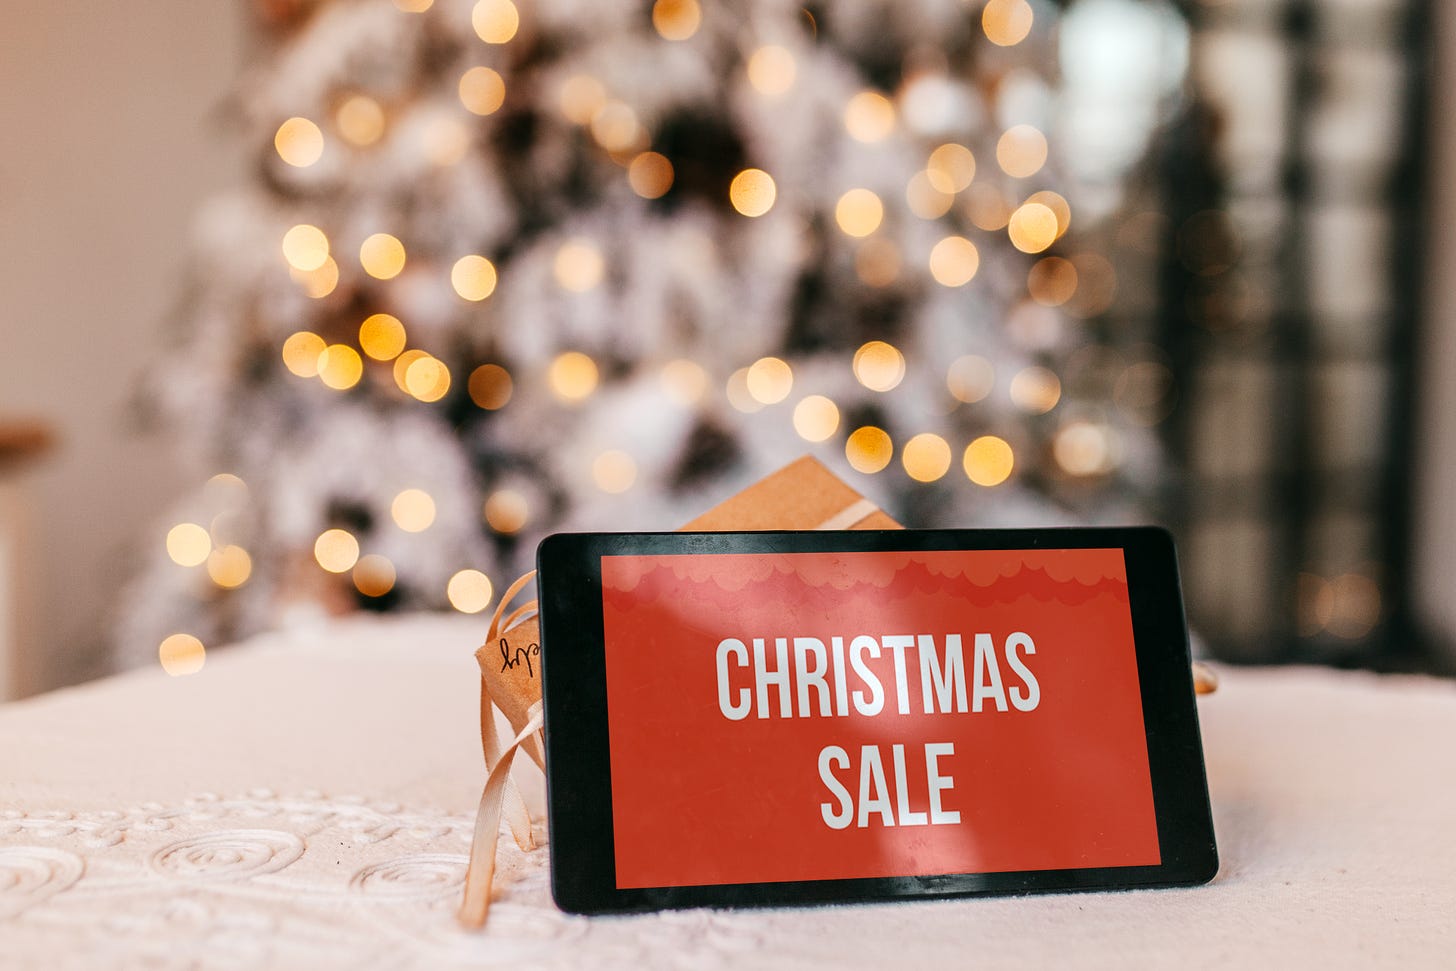 A phone bearing text that reads "Christmas Sale" stands against a traditional holiday background.